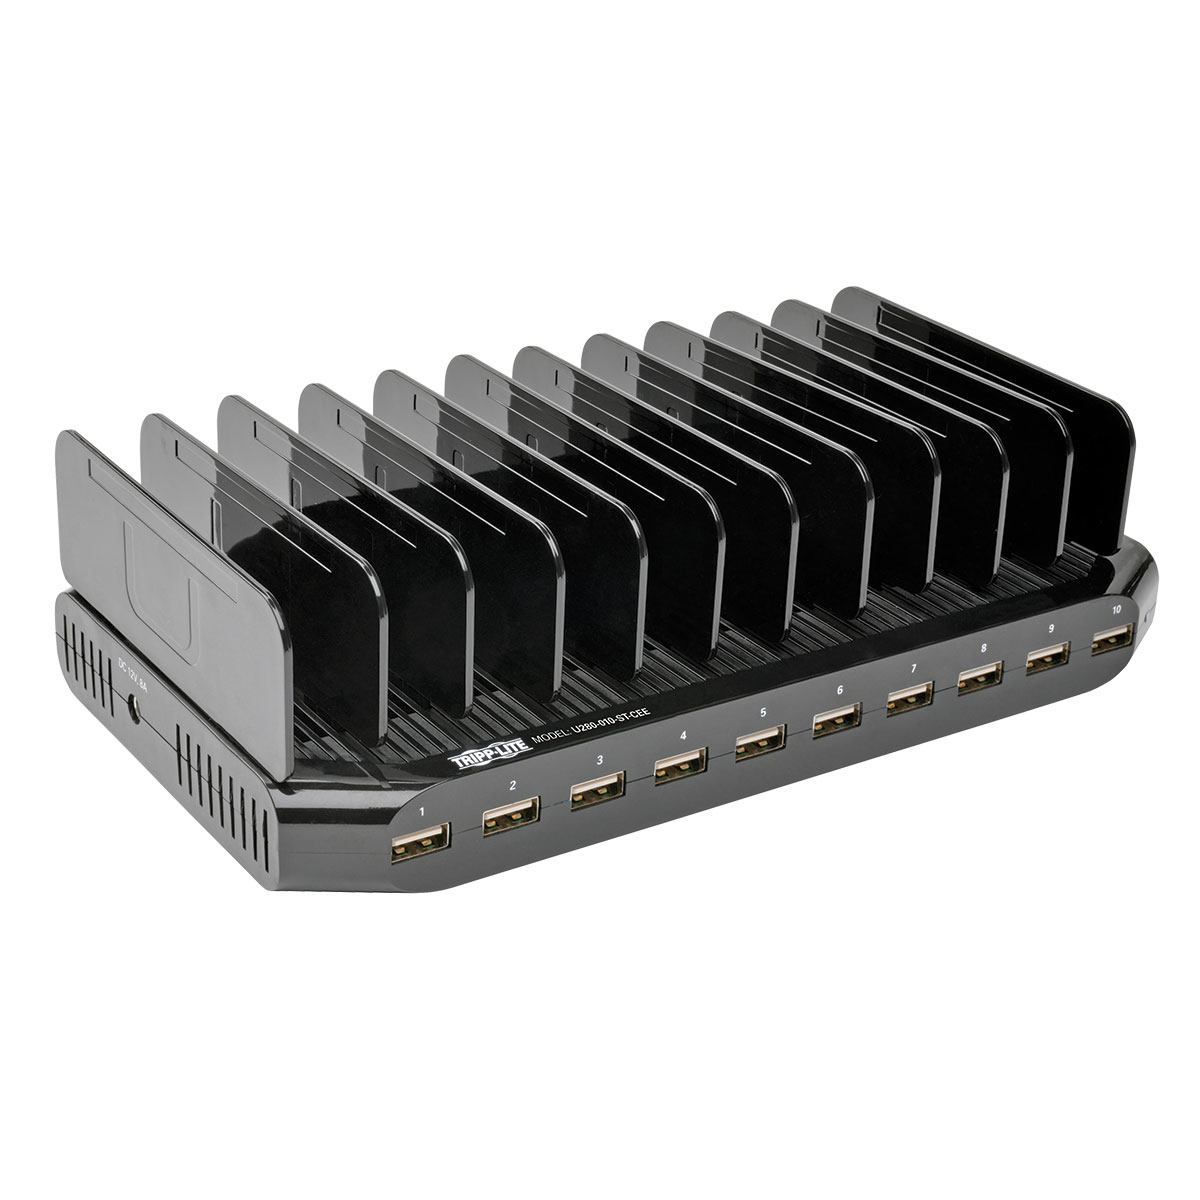 Tripp Lite 10-Port USB Charging Station with Adjustable Storage, 12V 8A (96W) USB Charger Output, Schuko Power Cord